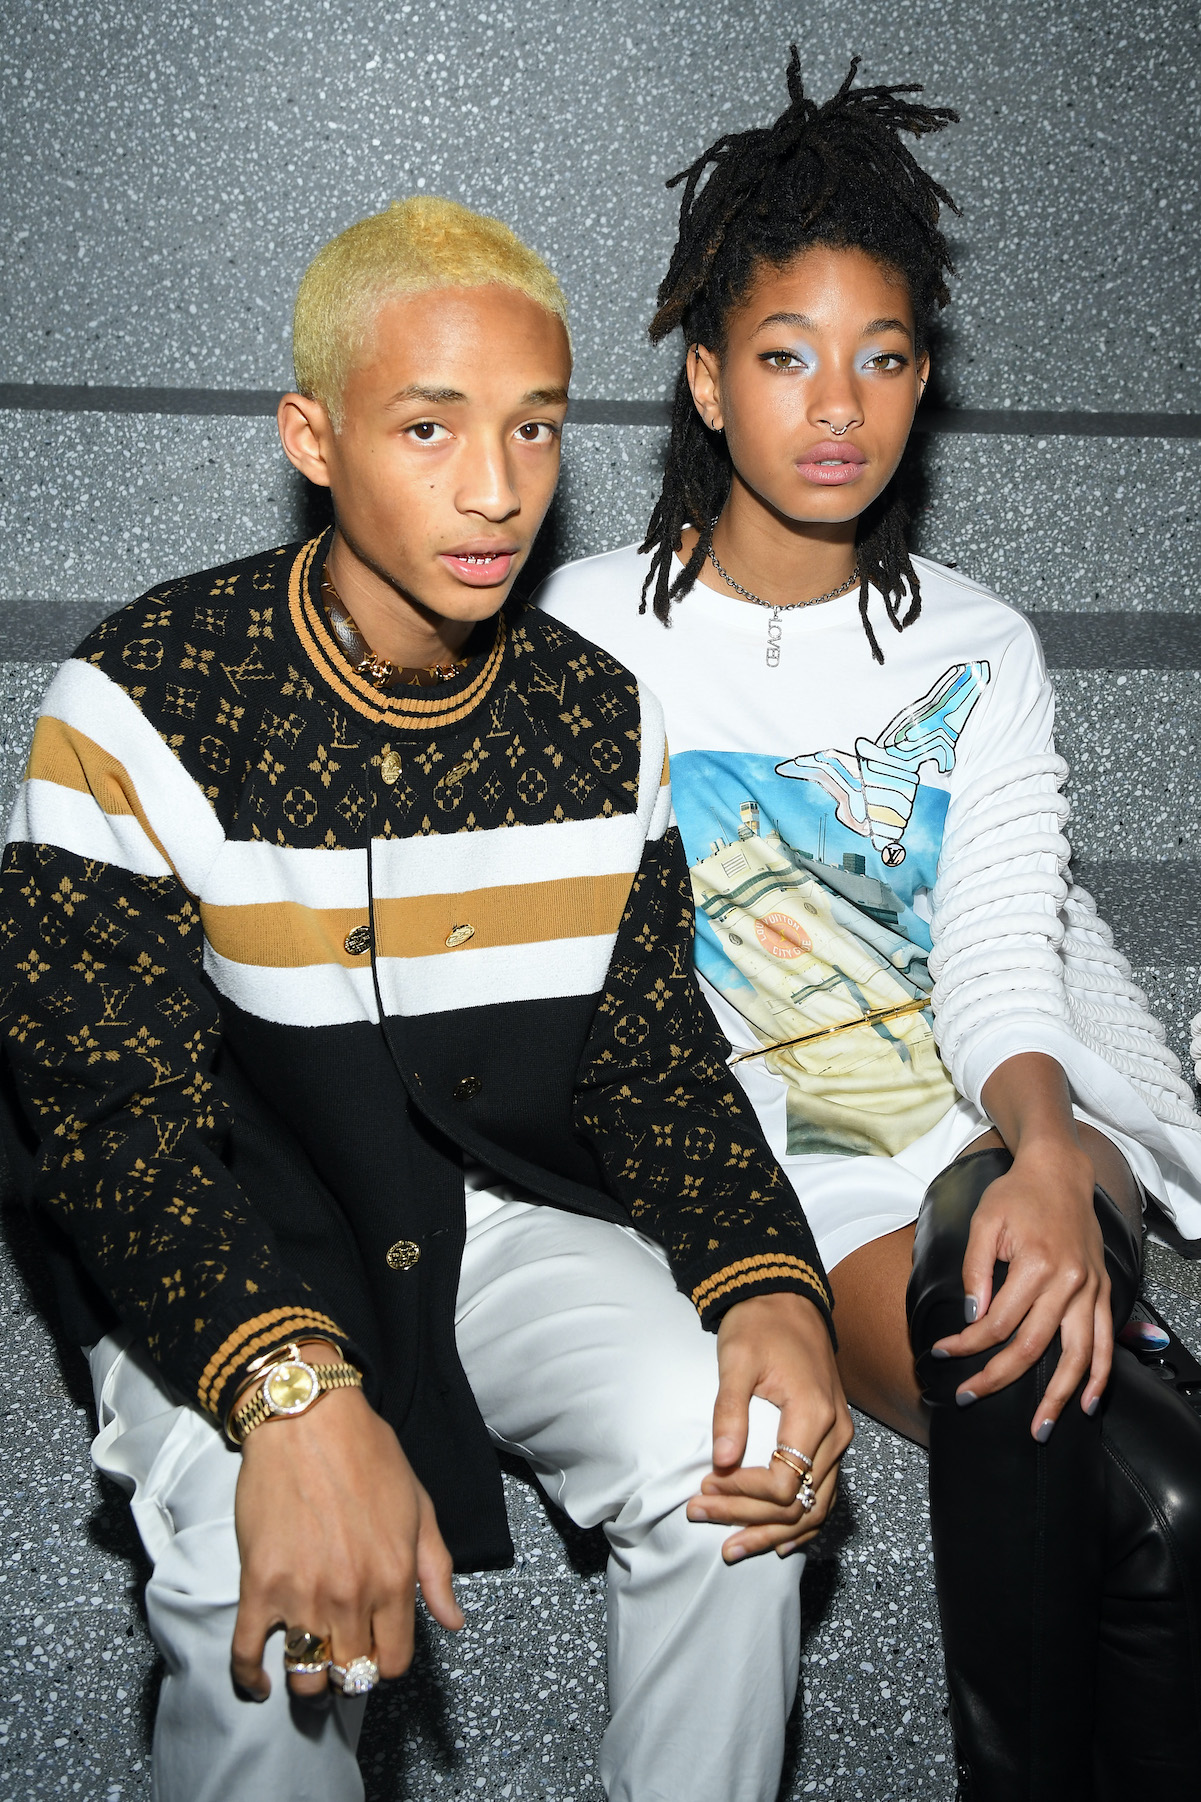 Jaden Smith and Willow Smith at Paris Fashion Week